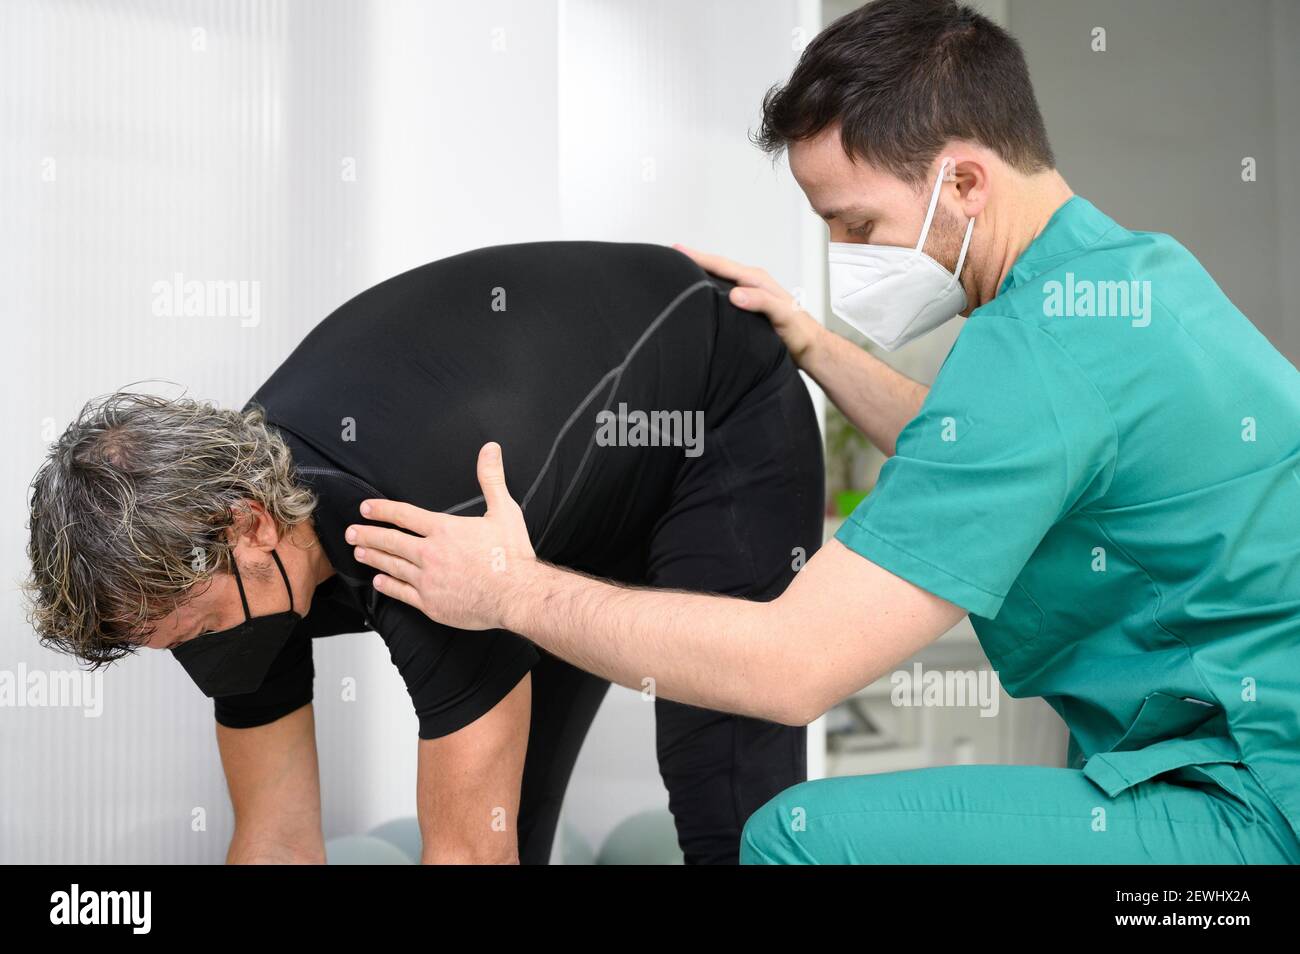 Physiotherapist helping patient in clinic. High quality photo. Stock Photo